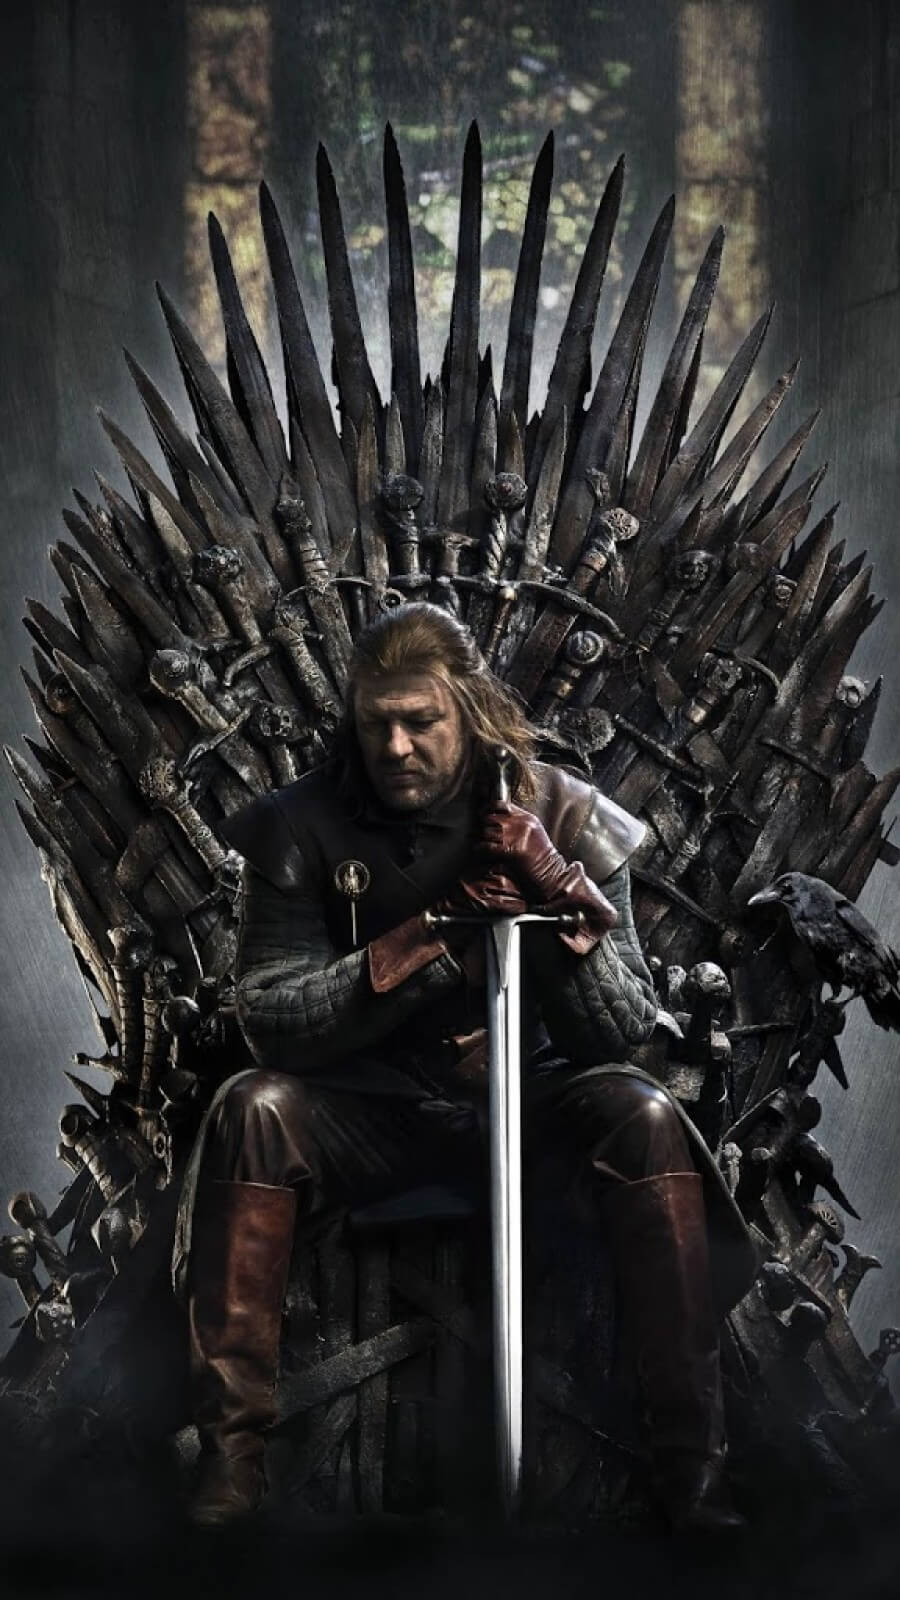 Astonishing Game Of Thrones Phone Wallpaper. Easy Download!